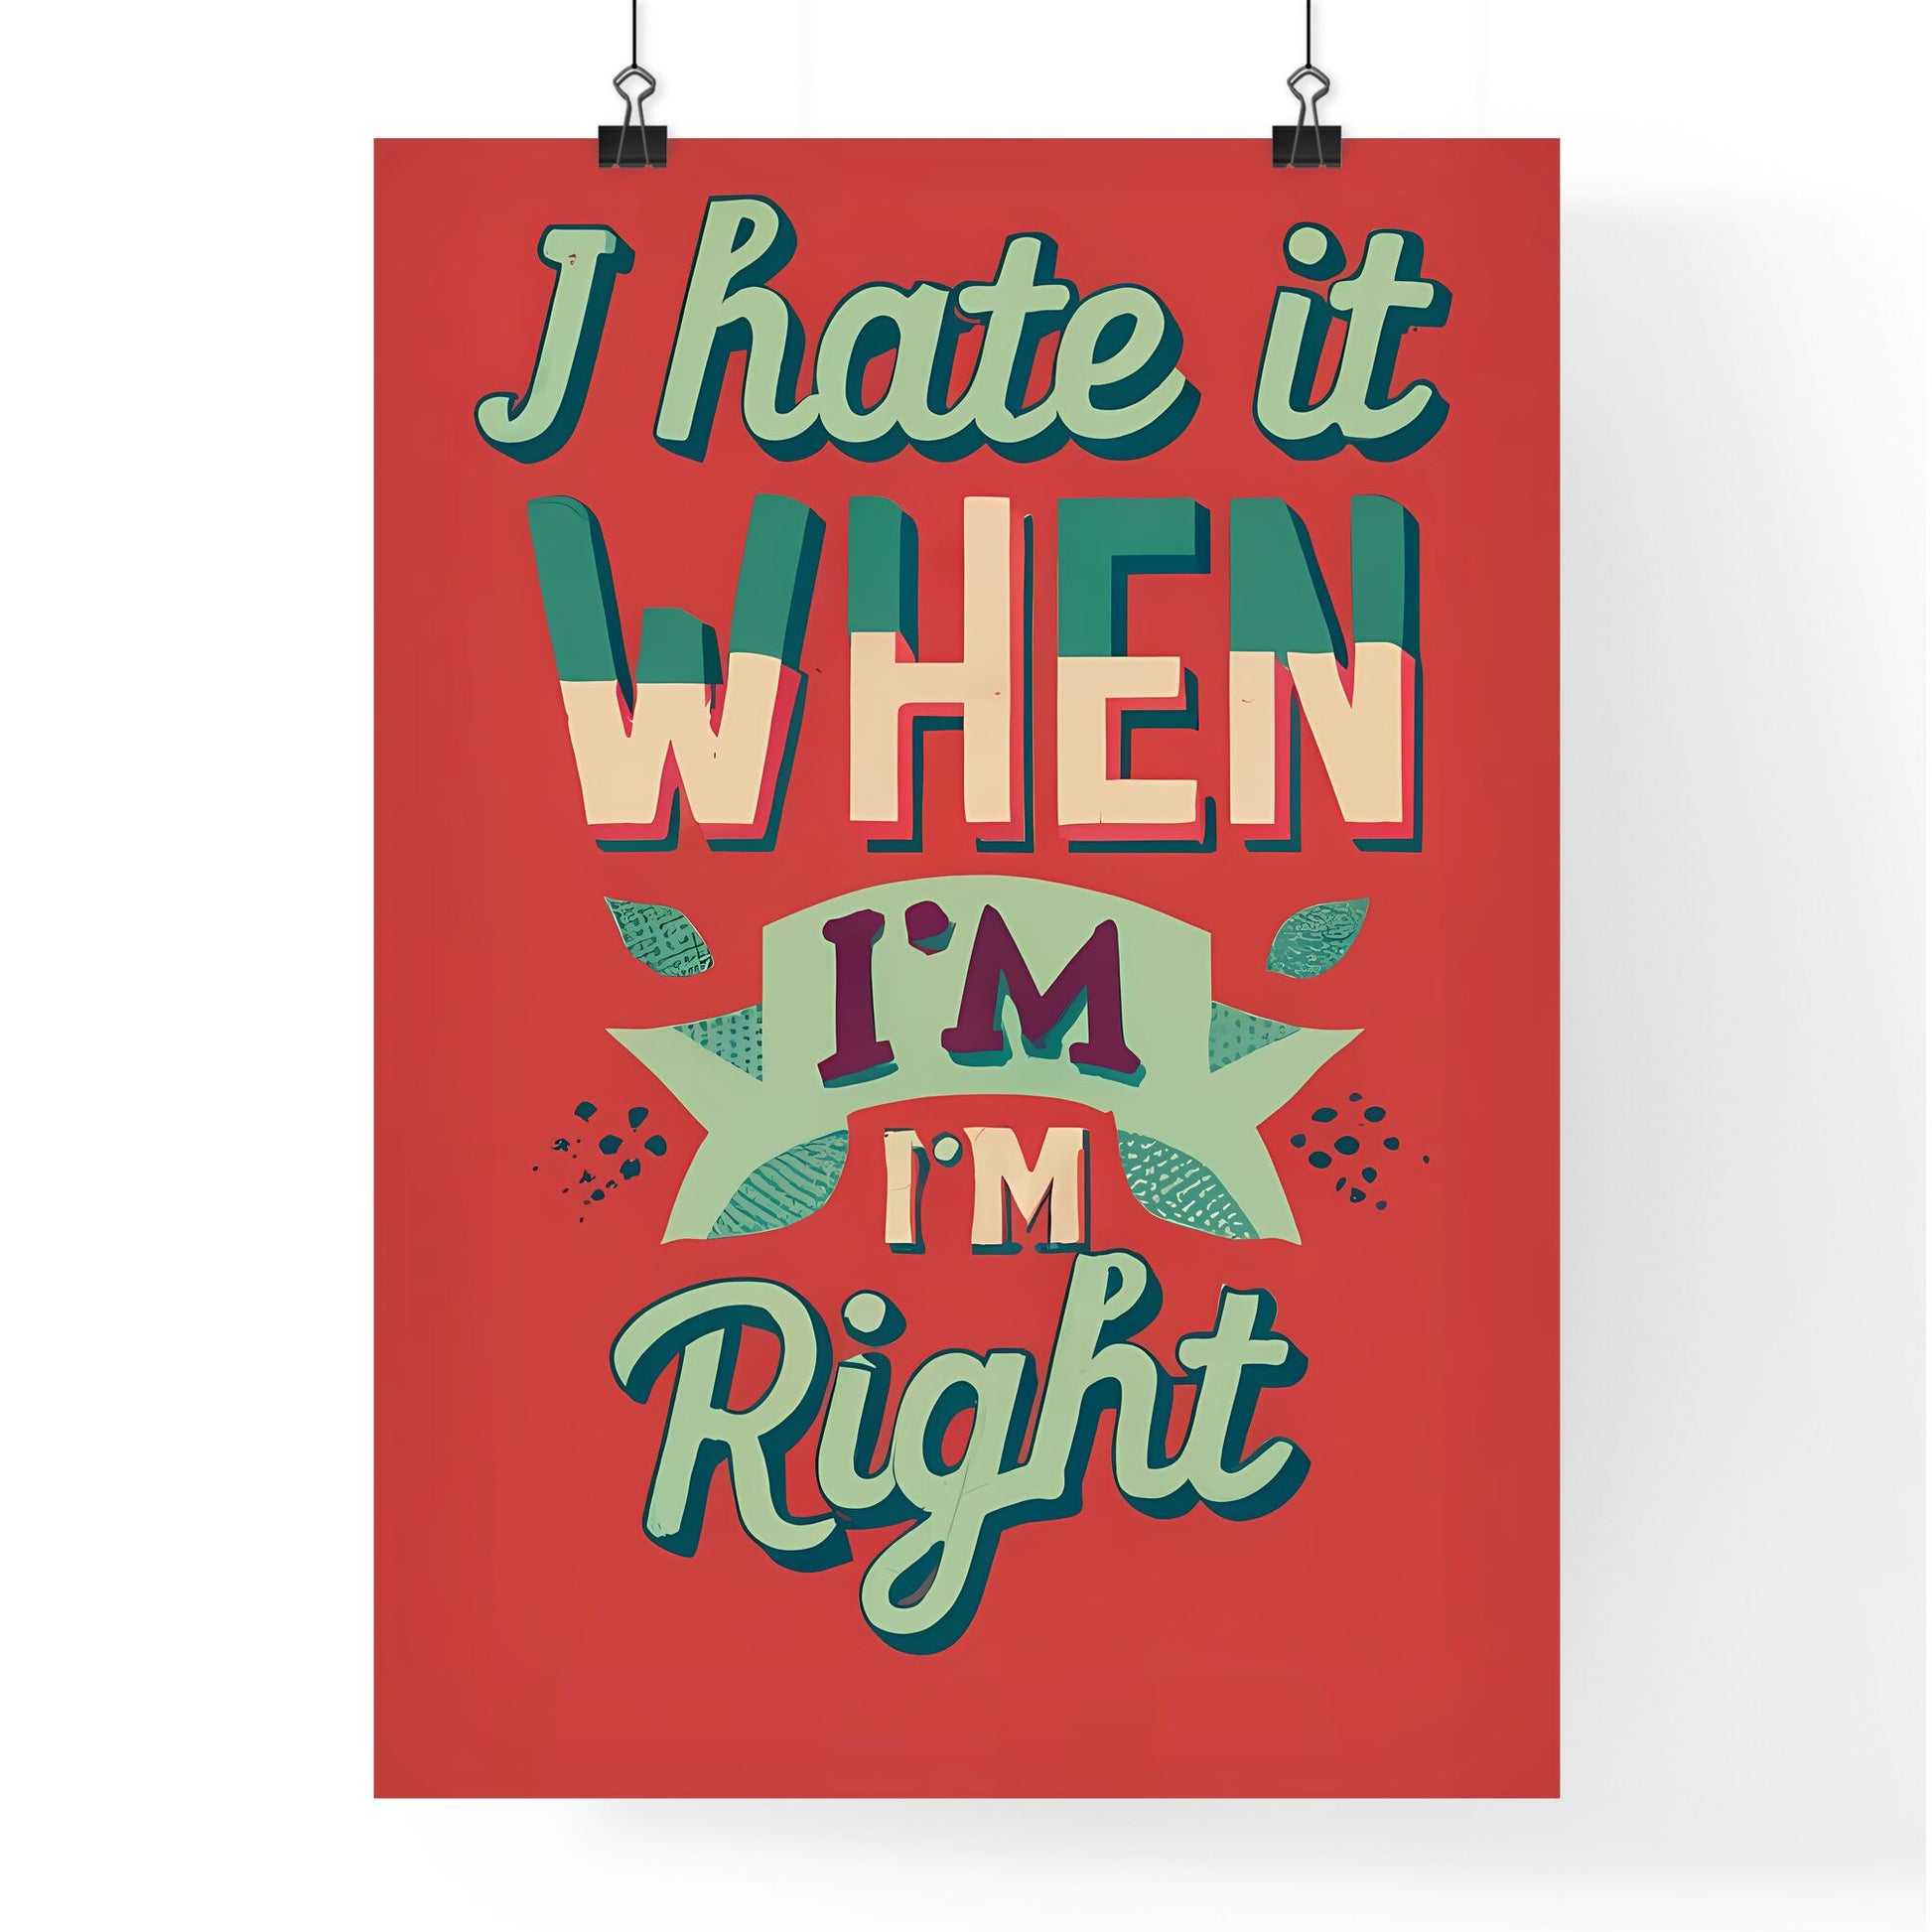 I Hate It - A Red Sign With White Text Default Title